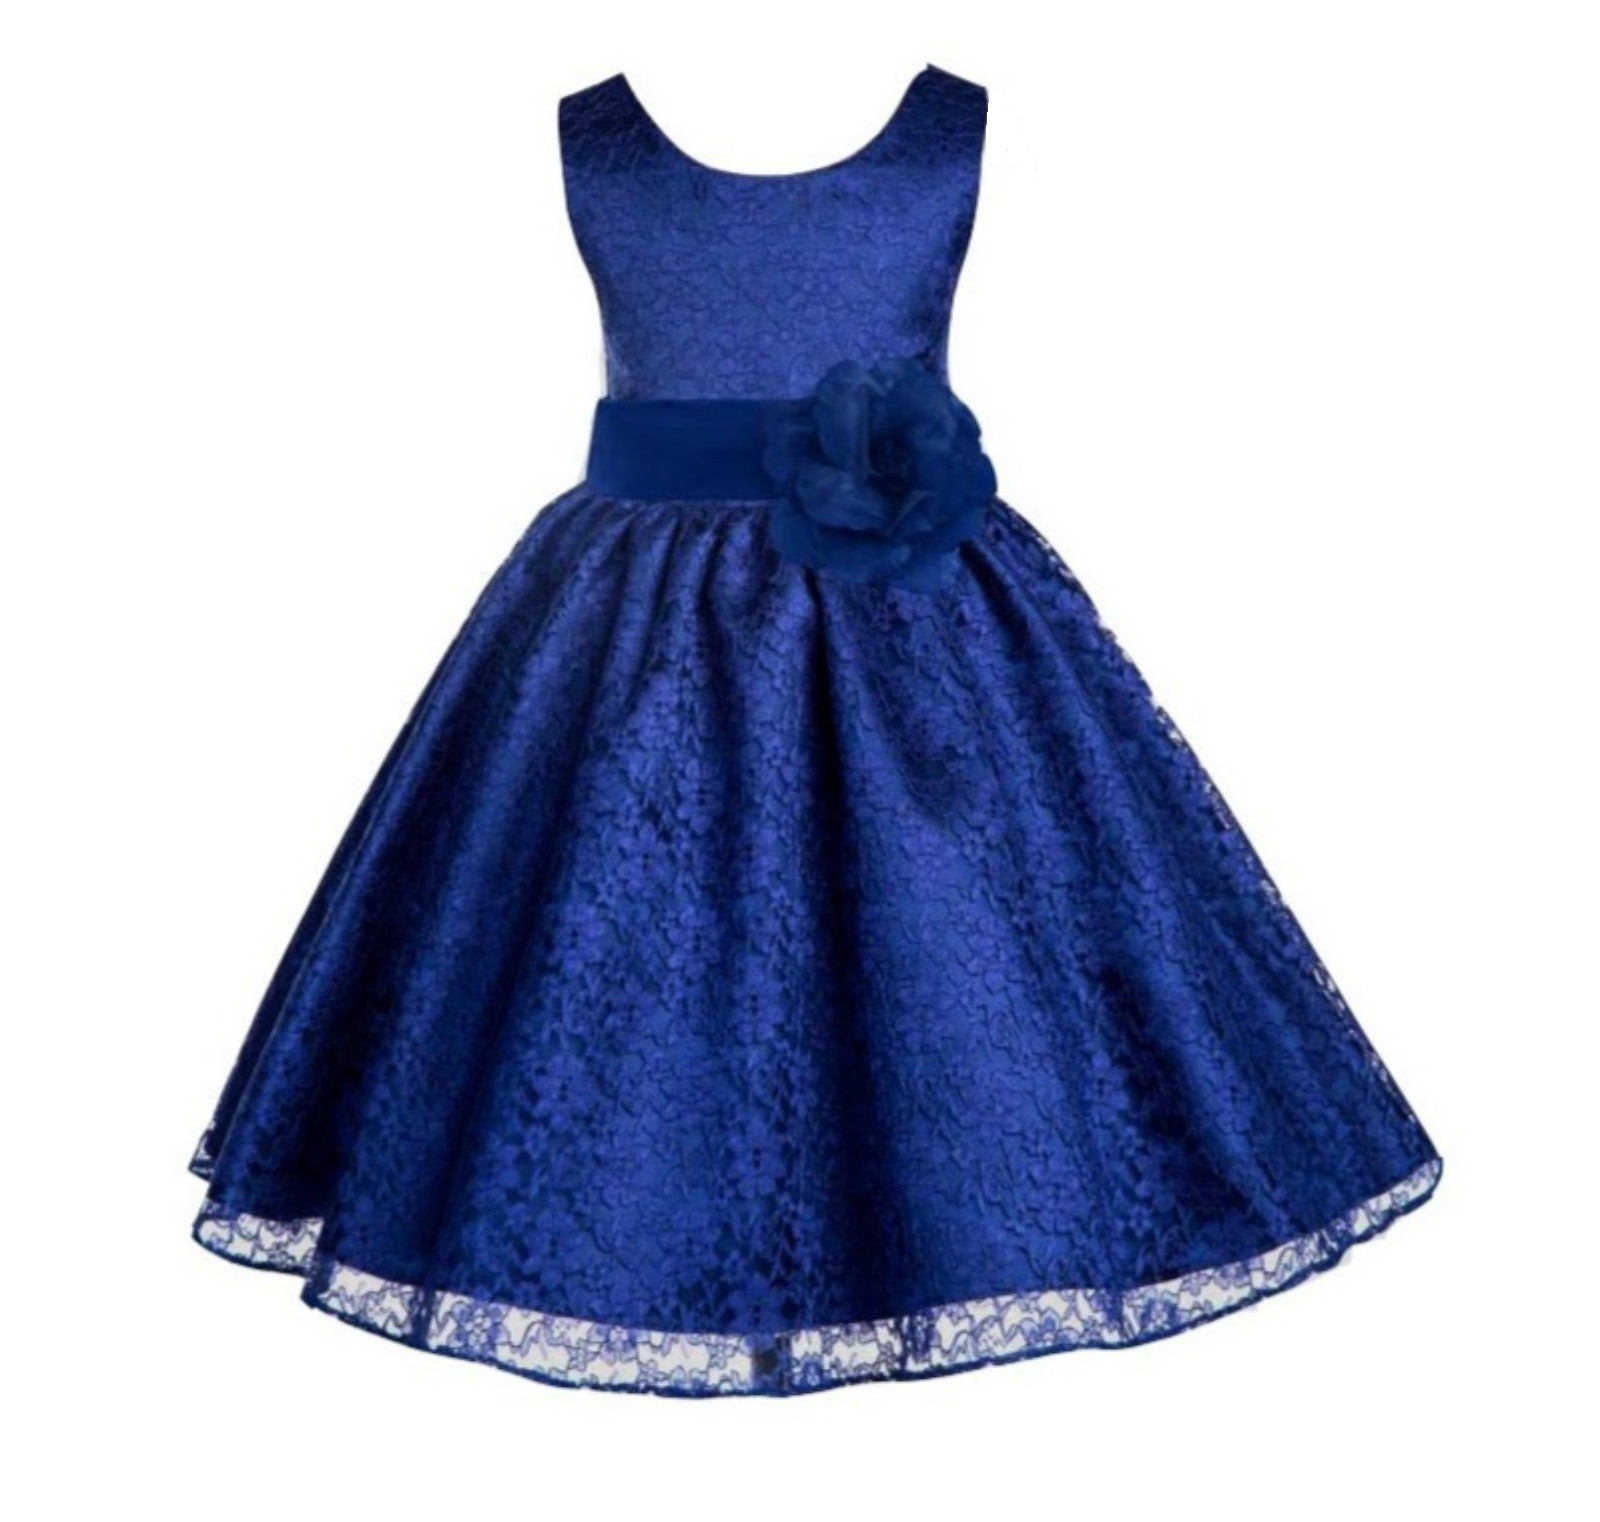 Navy Blue Floral Lace Overlay Flower Girl Dress Formal Beauty 163S